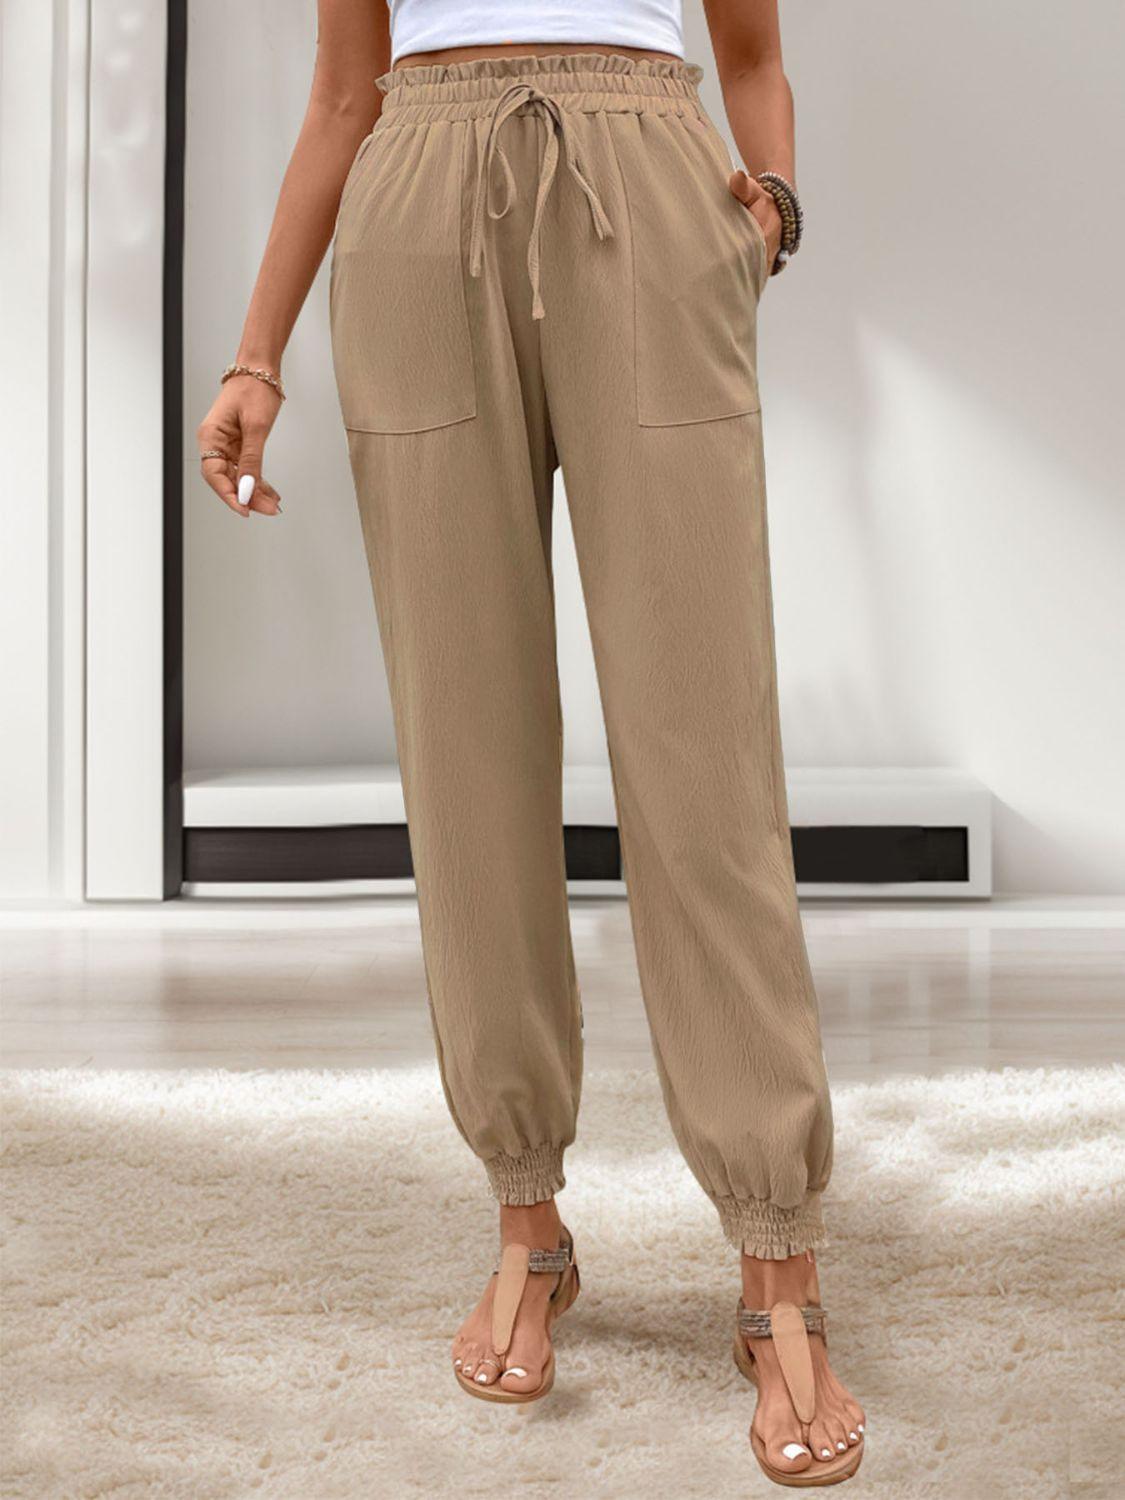 Women's Pants Tied Elastic Waist Pants with Pockets